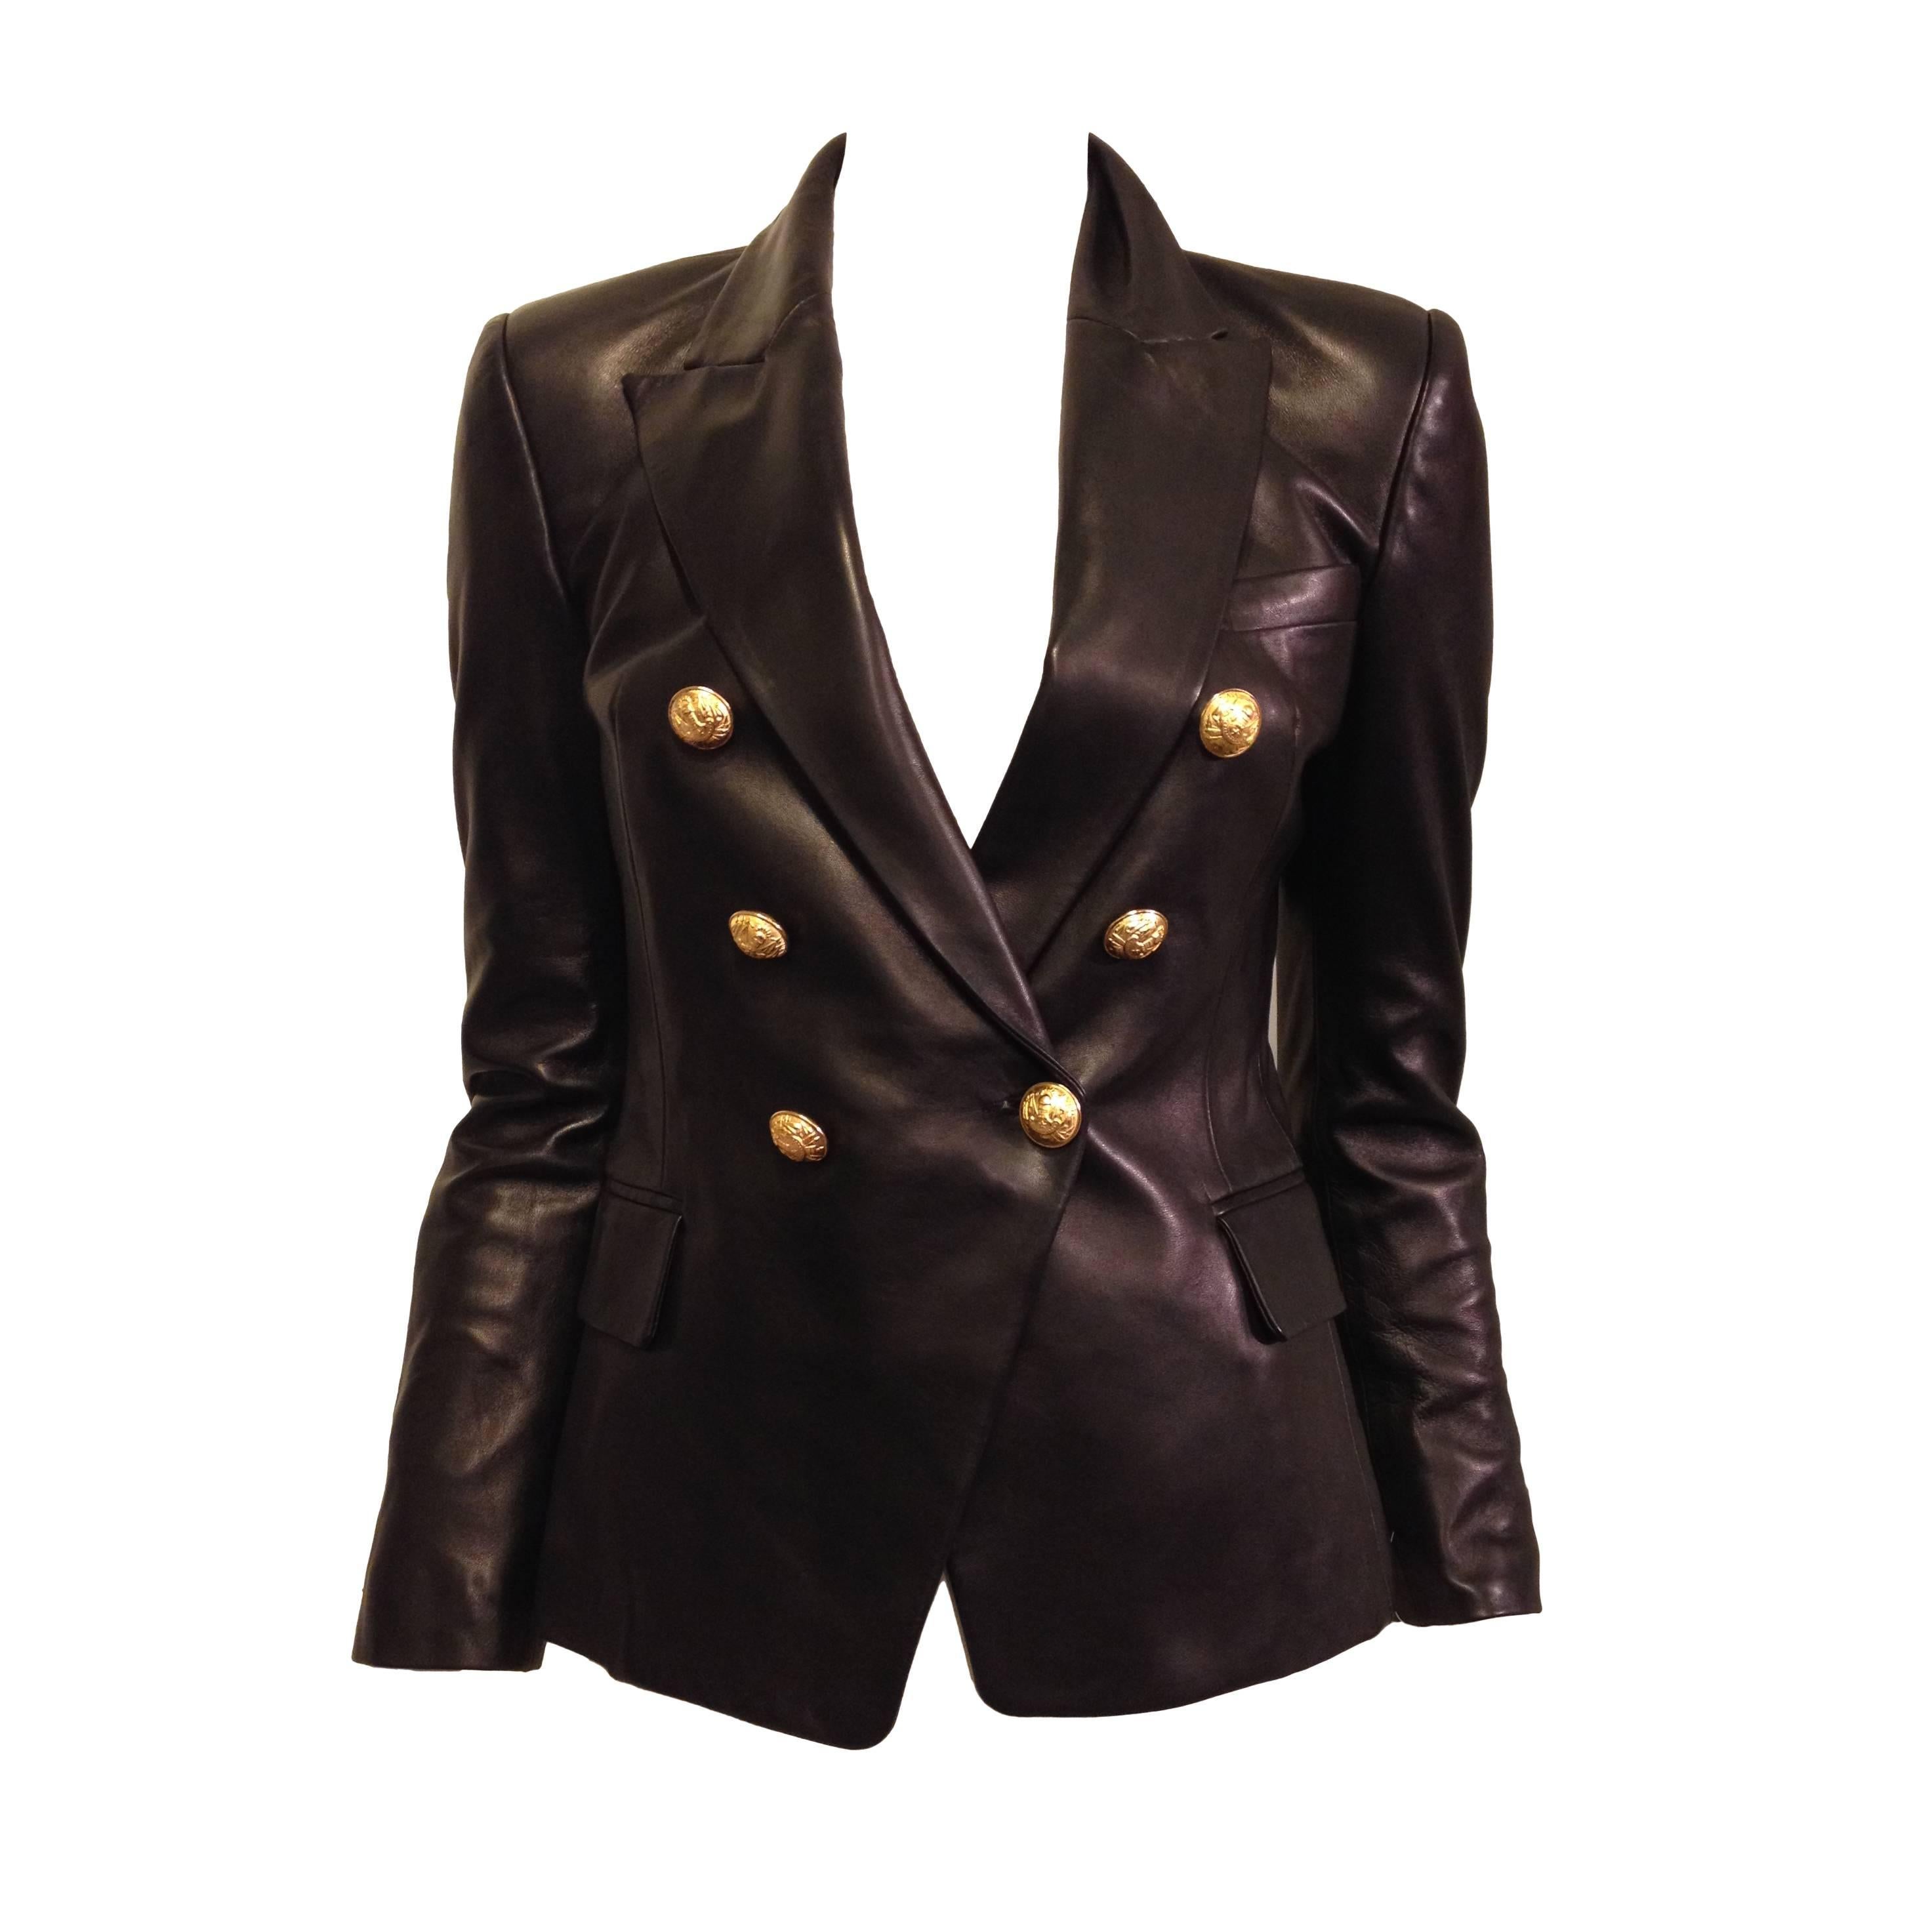 Balmain Black Leather Blazer with Gold Buttons